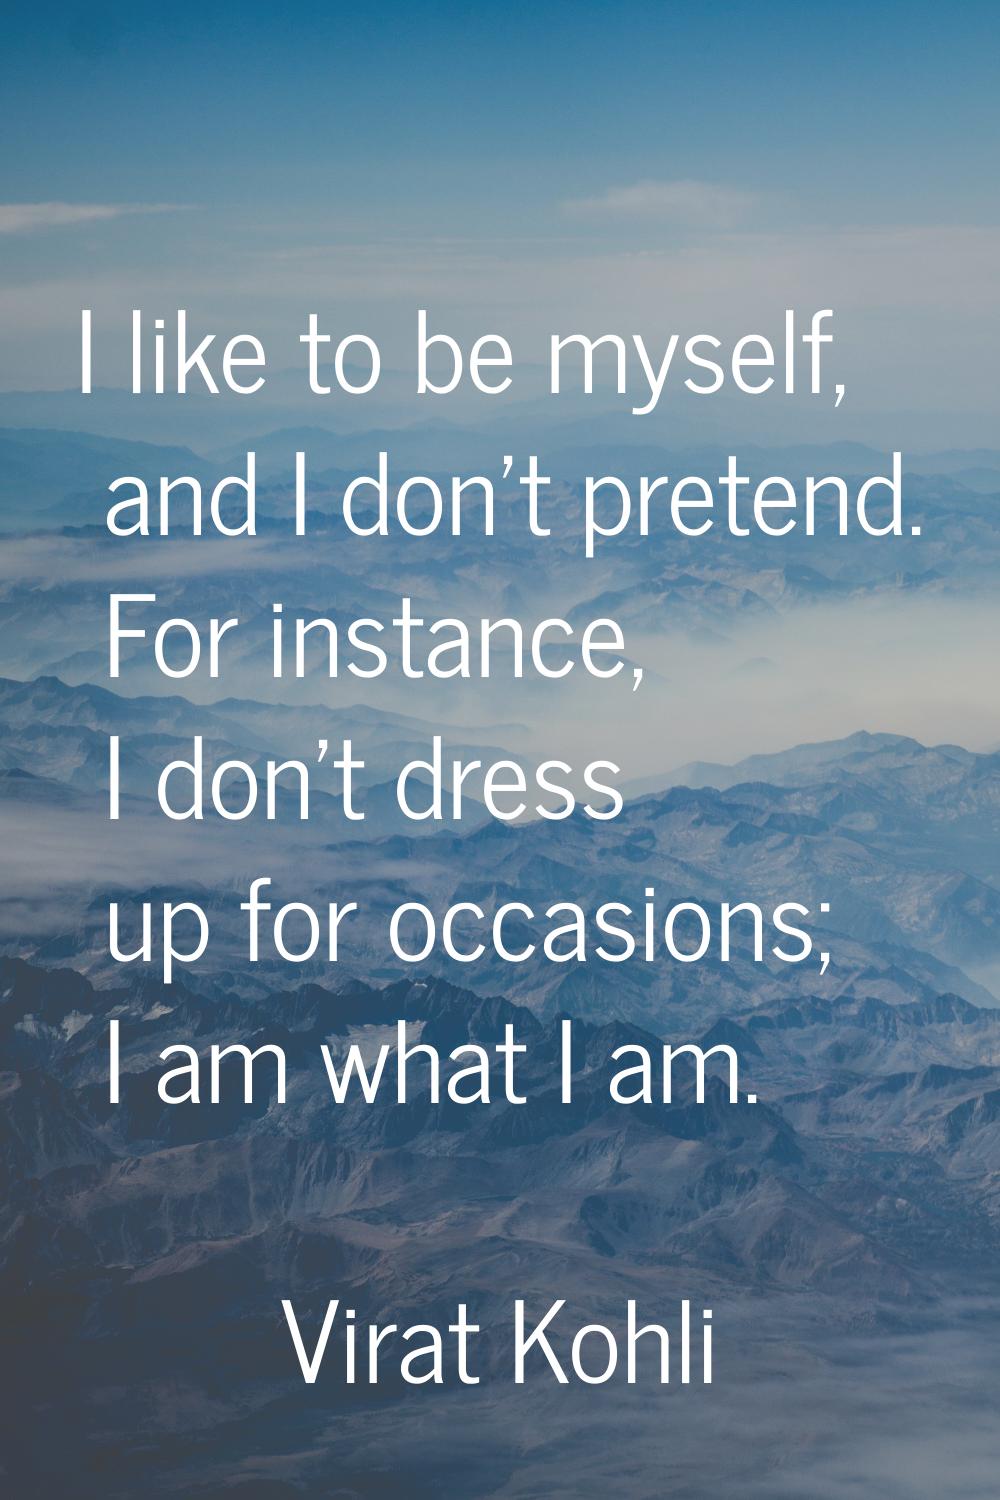 I like to be myself, and I don't pretend. For instance, I don't dress up for occasions; I am what I